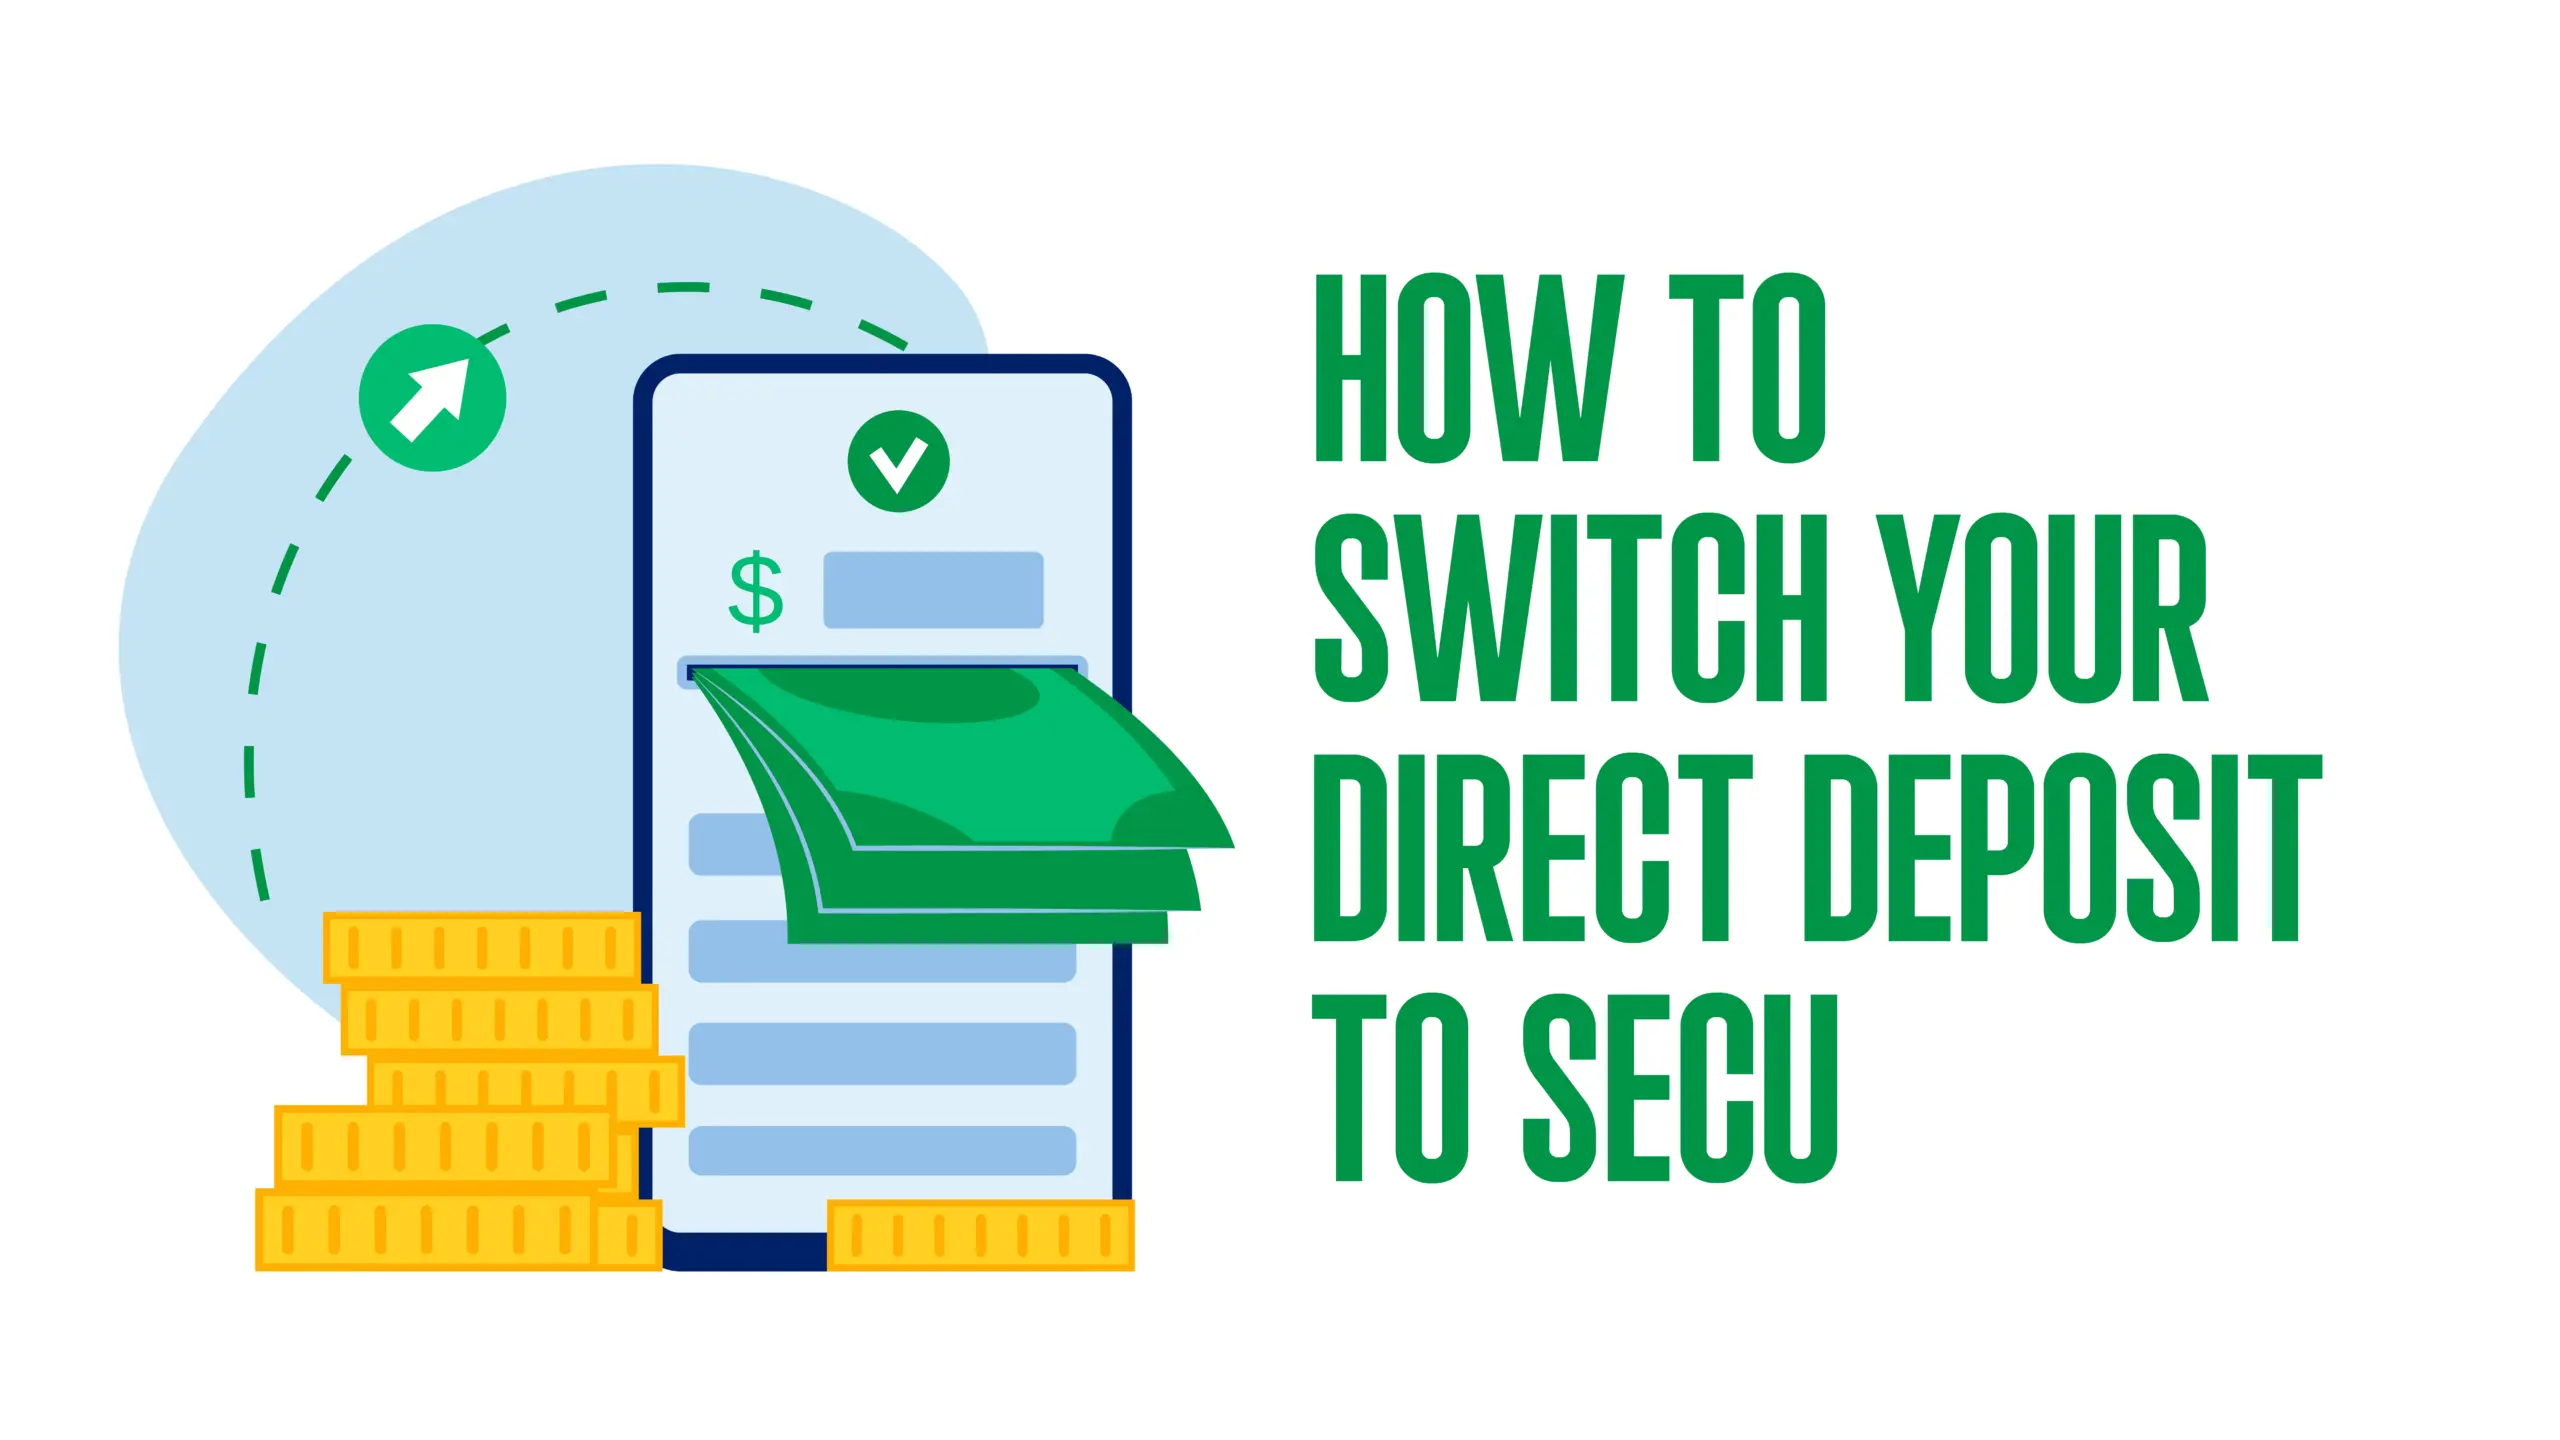 How to Switch Your Direct Deposit to SECU